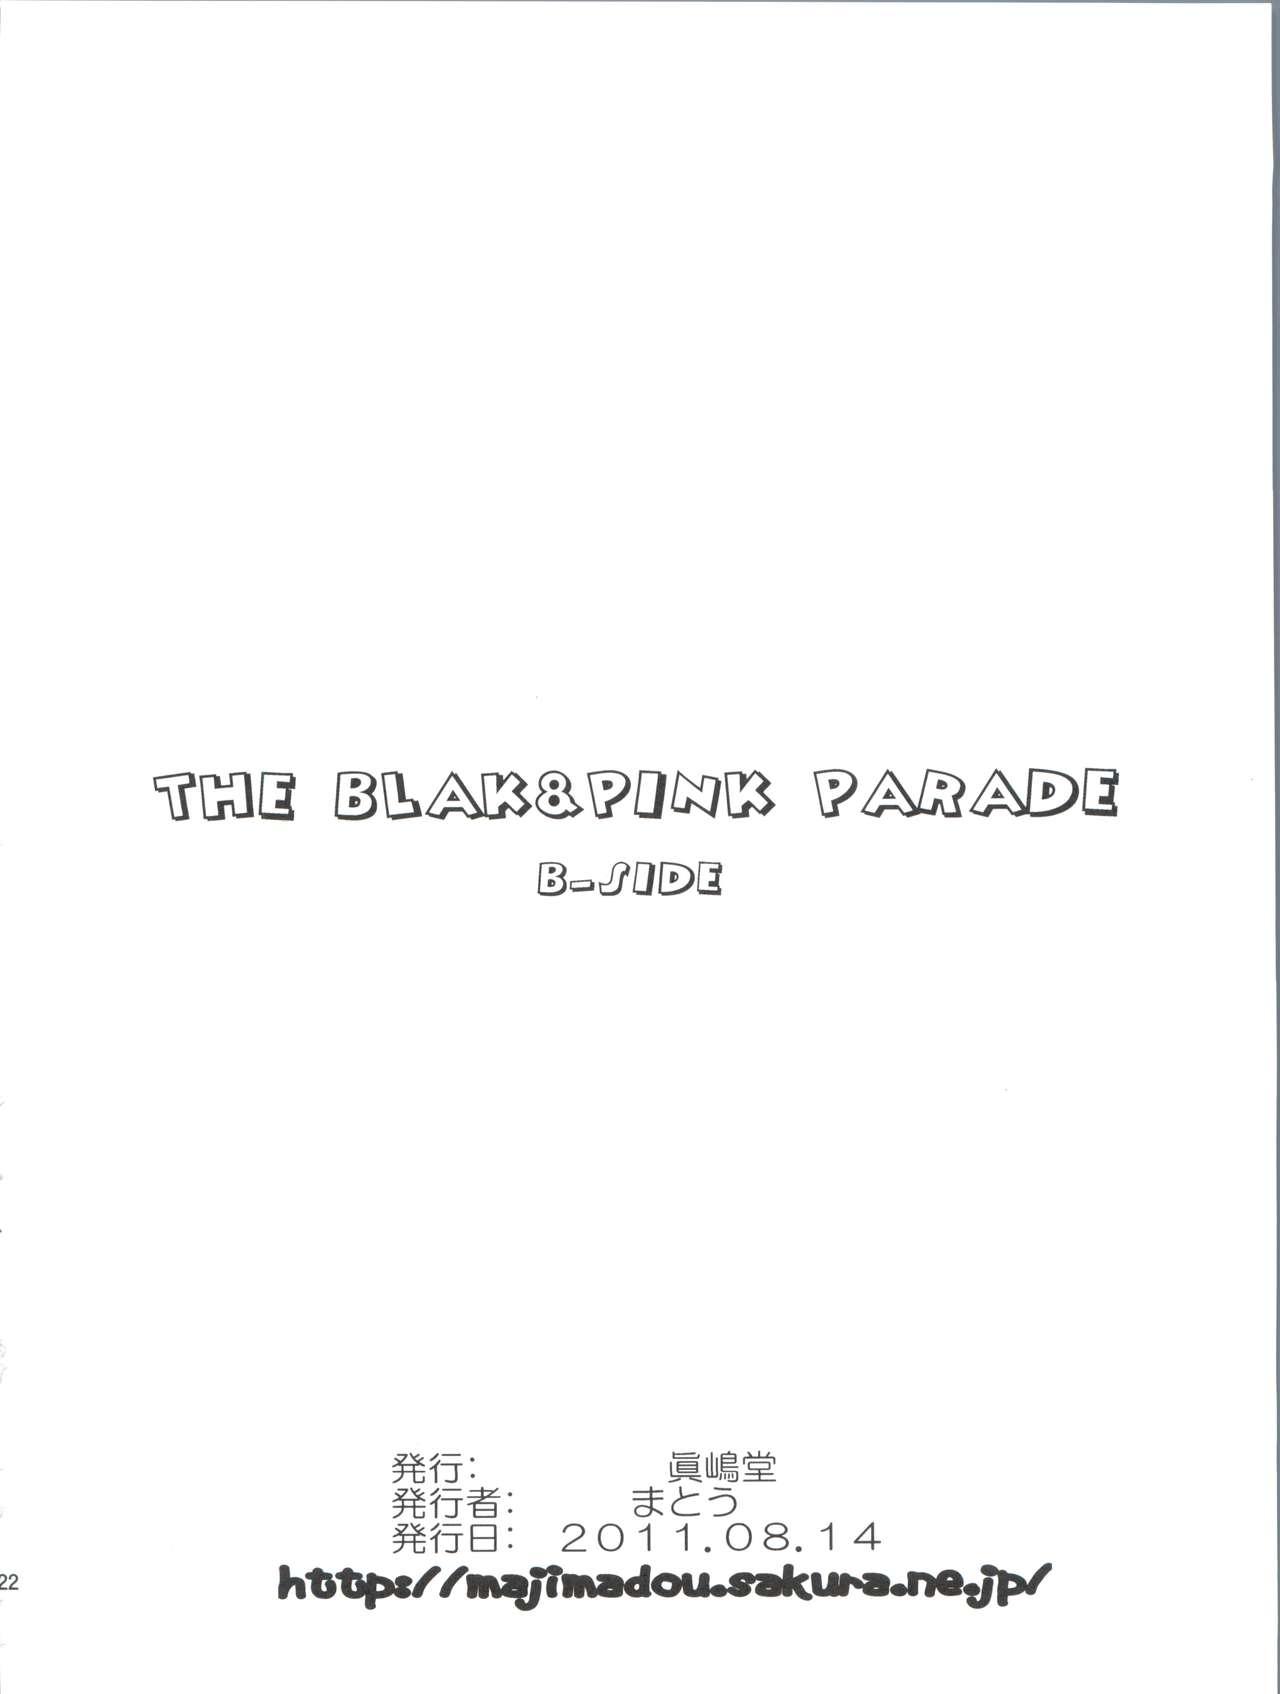 Namorada The Black & Pink Parade B-Side - The idolmaster Little - Page 21